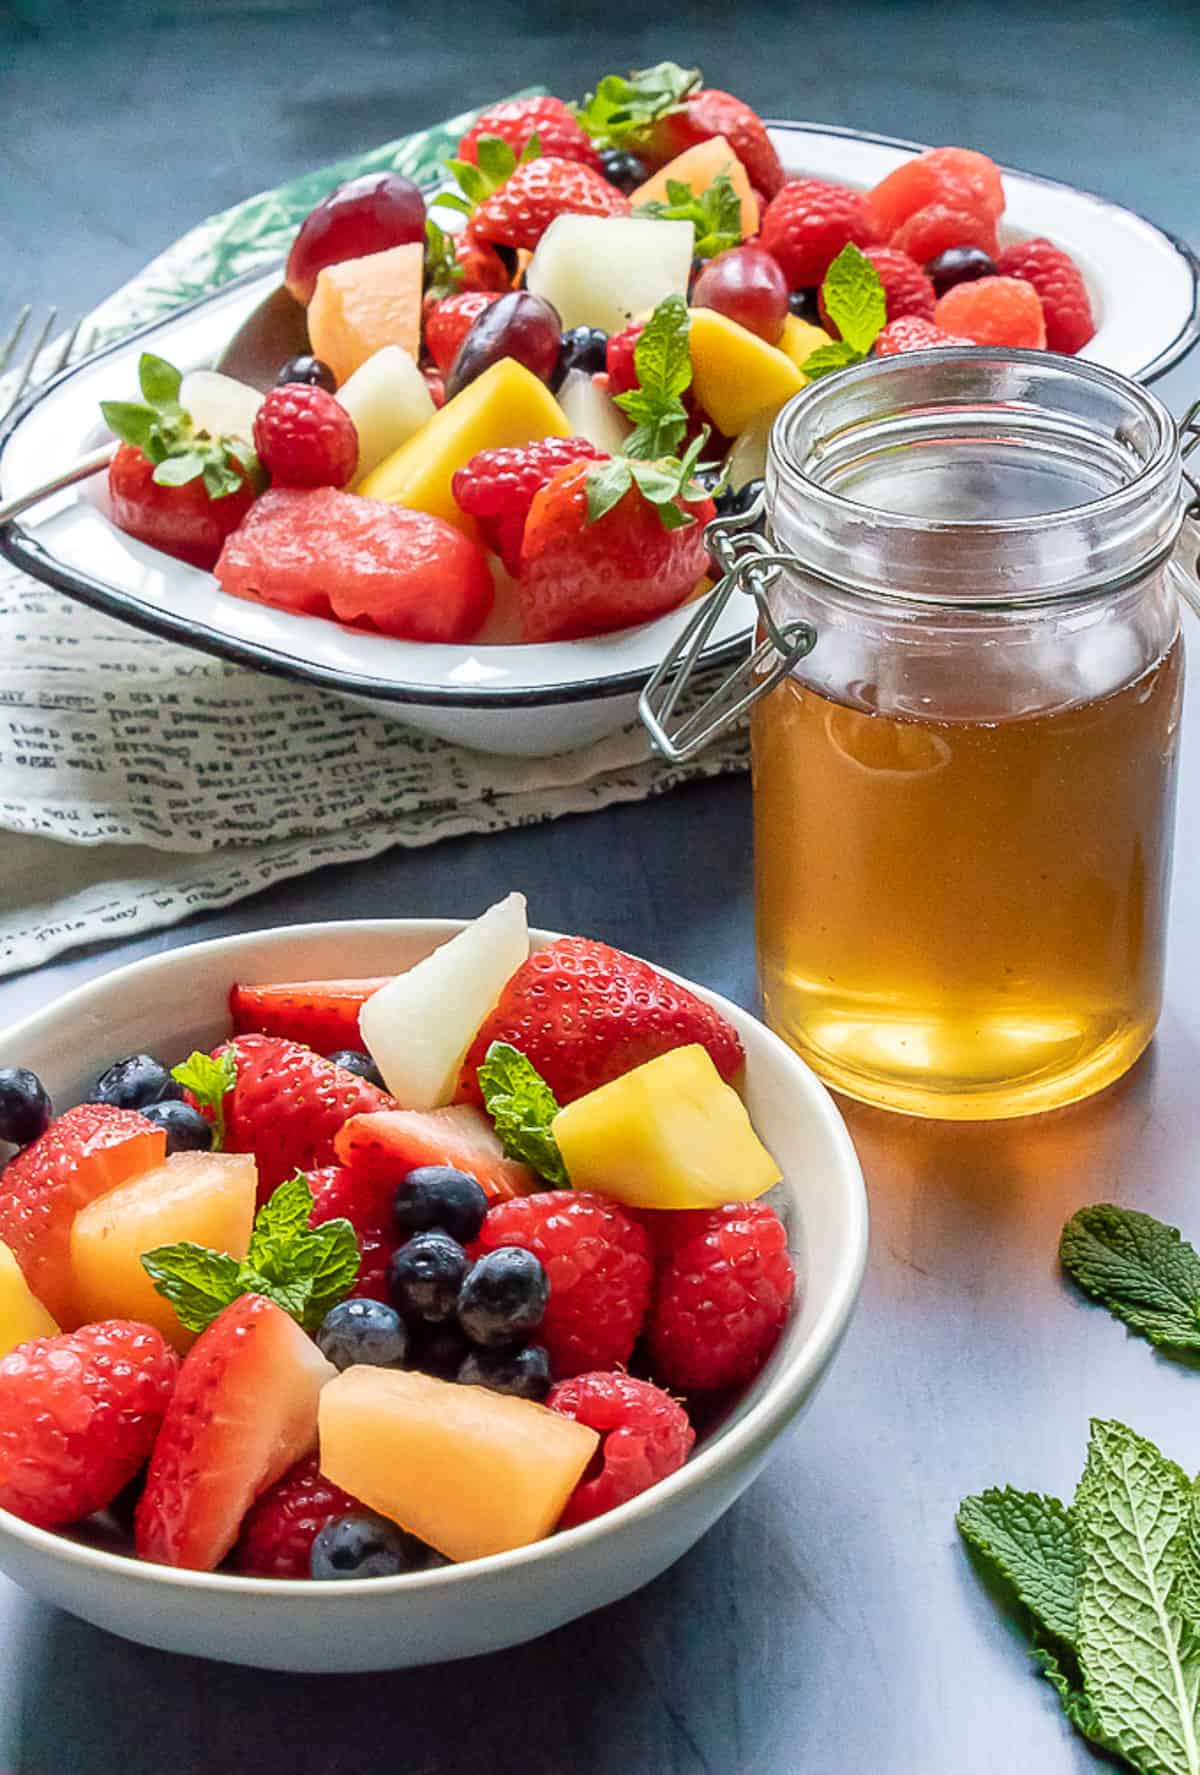 Fruit salad in dishes, next to a jar of tea syrup.